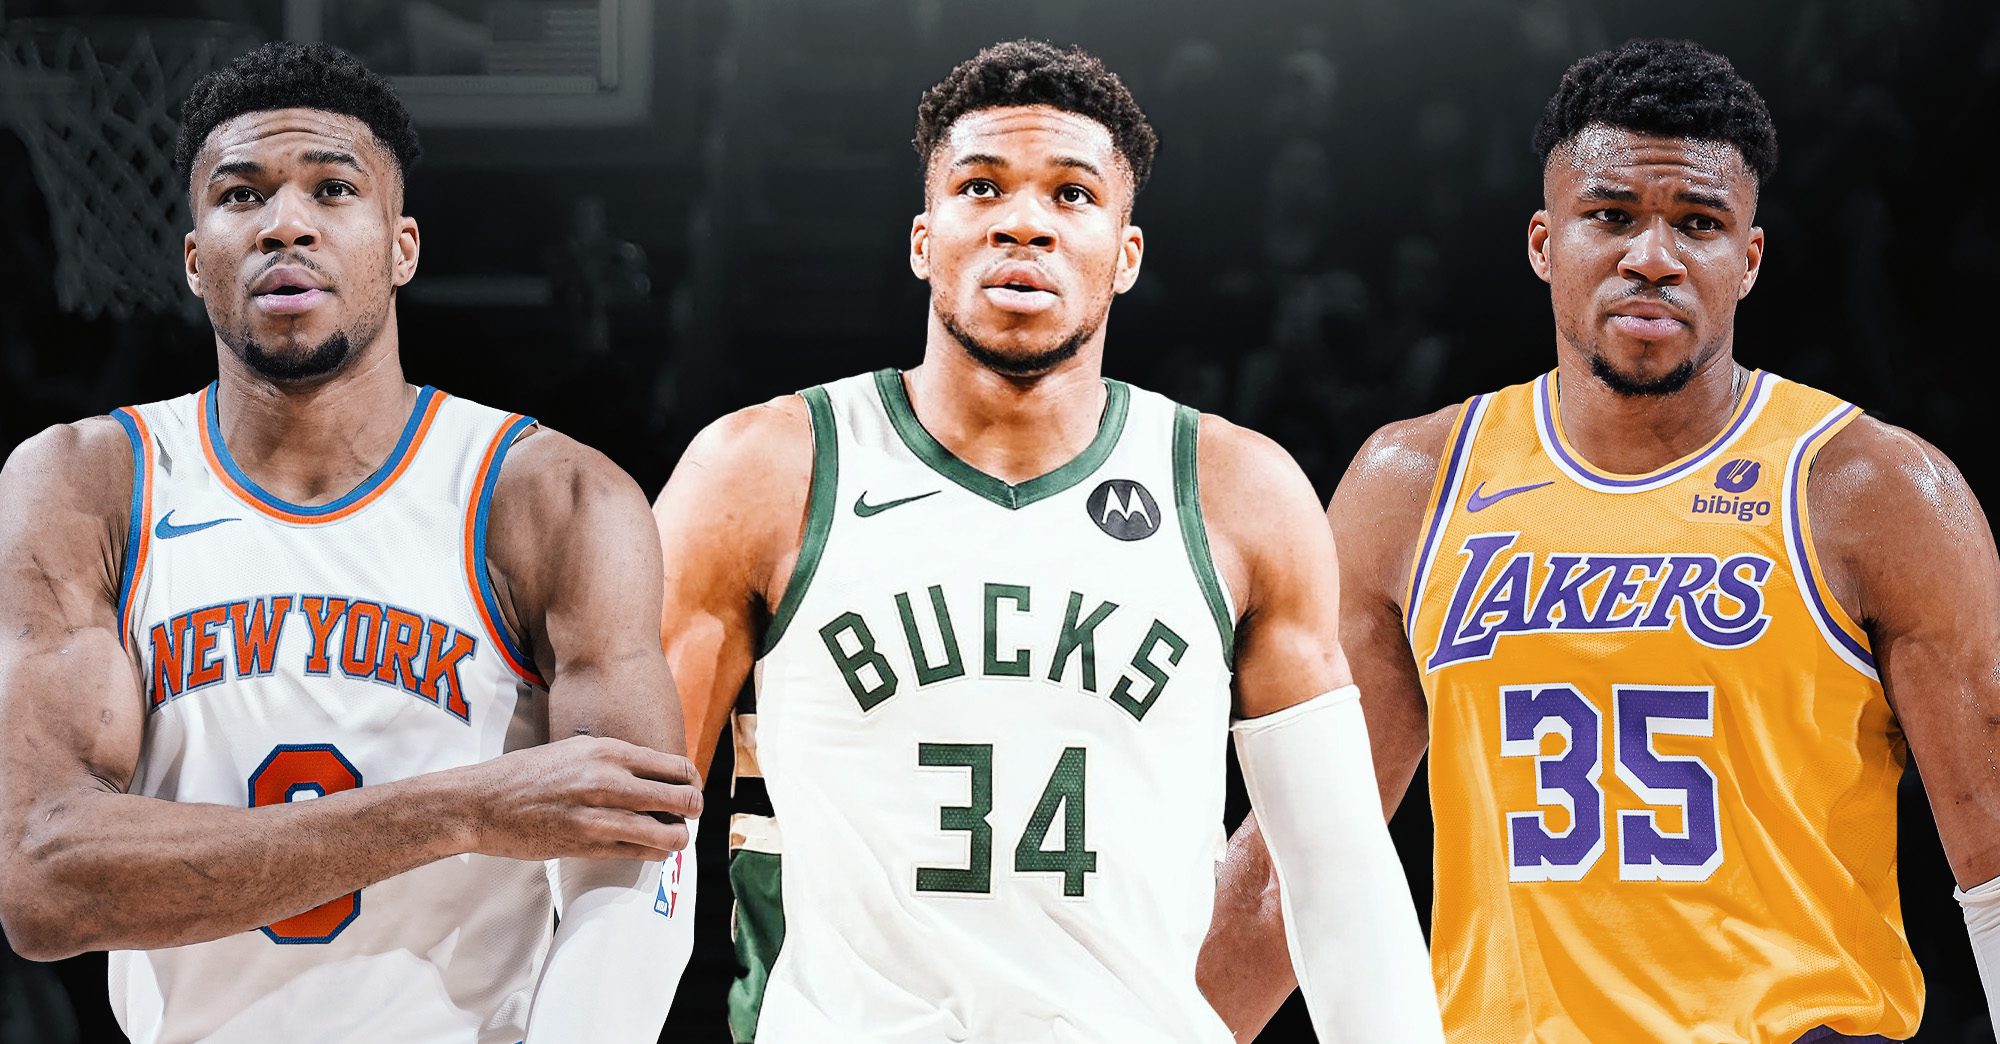 NBA Insider Says Bucks Could Look to Trade Giannis